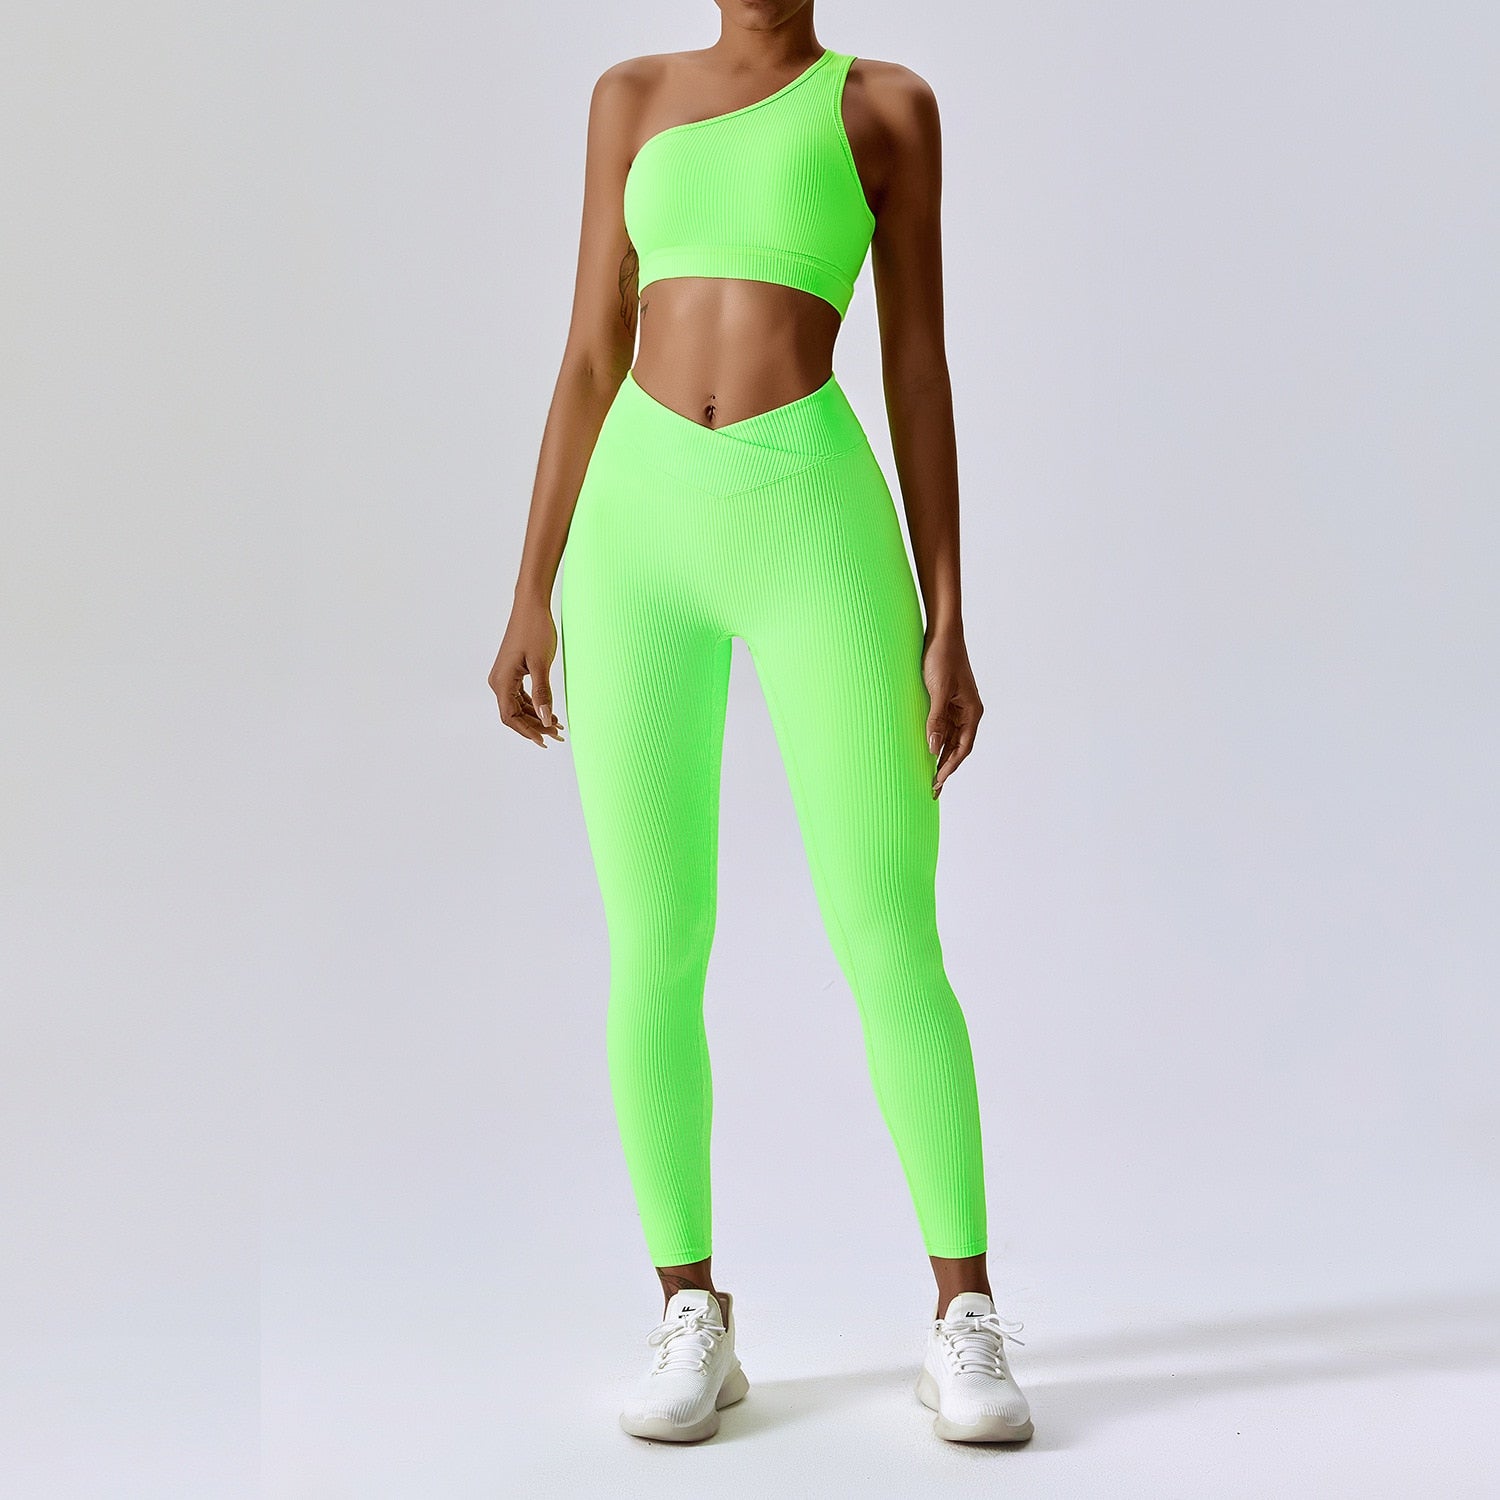 Ribbed Yoga Set Sportswear Women Suit For Fitness Clothing Sports Suit Workout Clothes Tracksuit Sports Outfit Gym Clothing Wear GreenSet-4XLChina  71.99 EZYSELLA SHOP